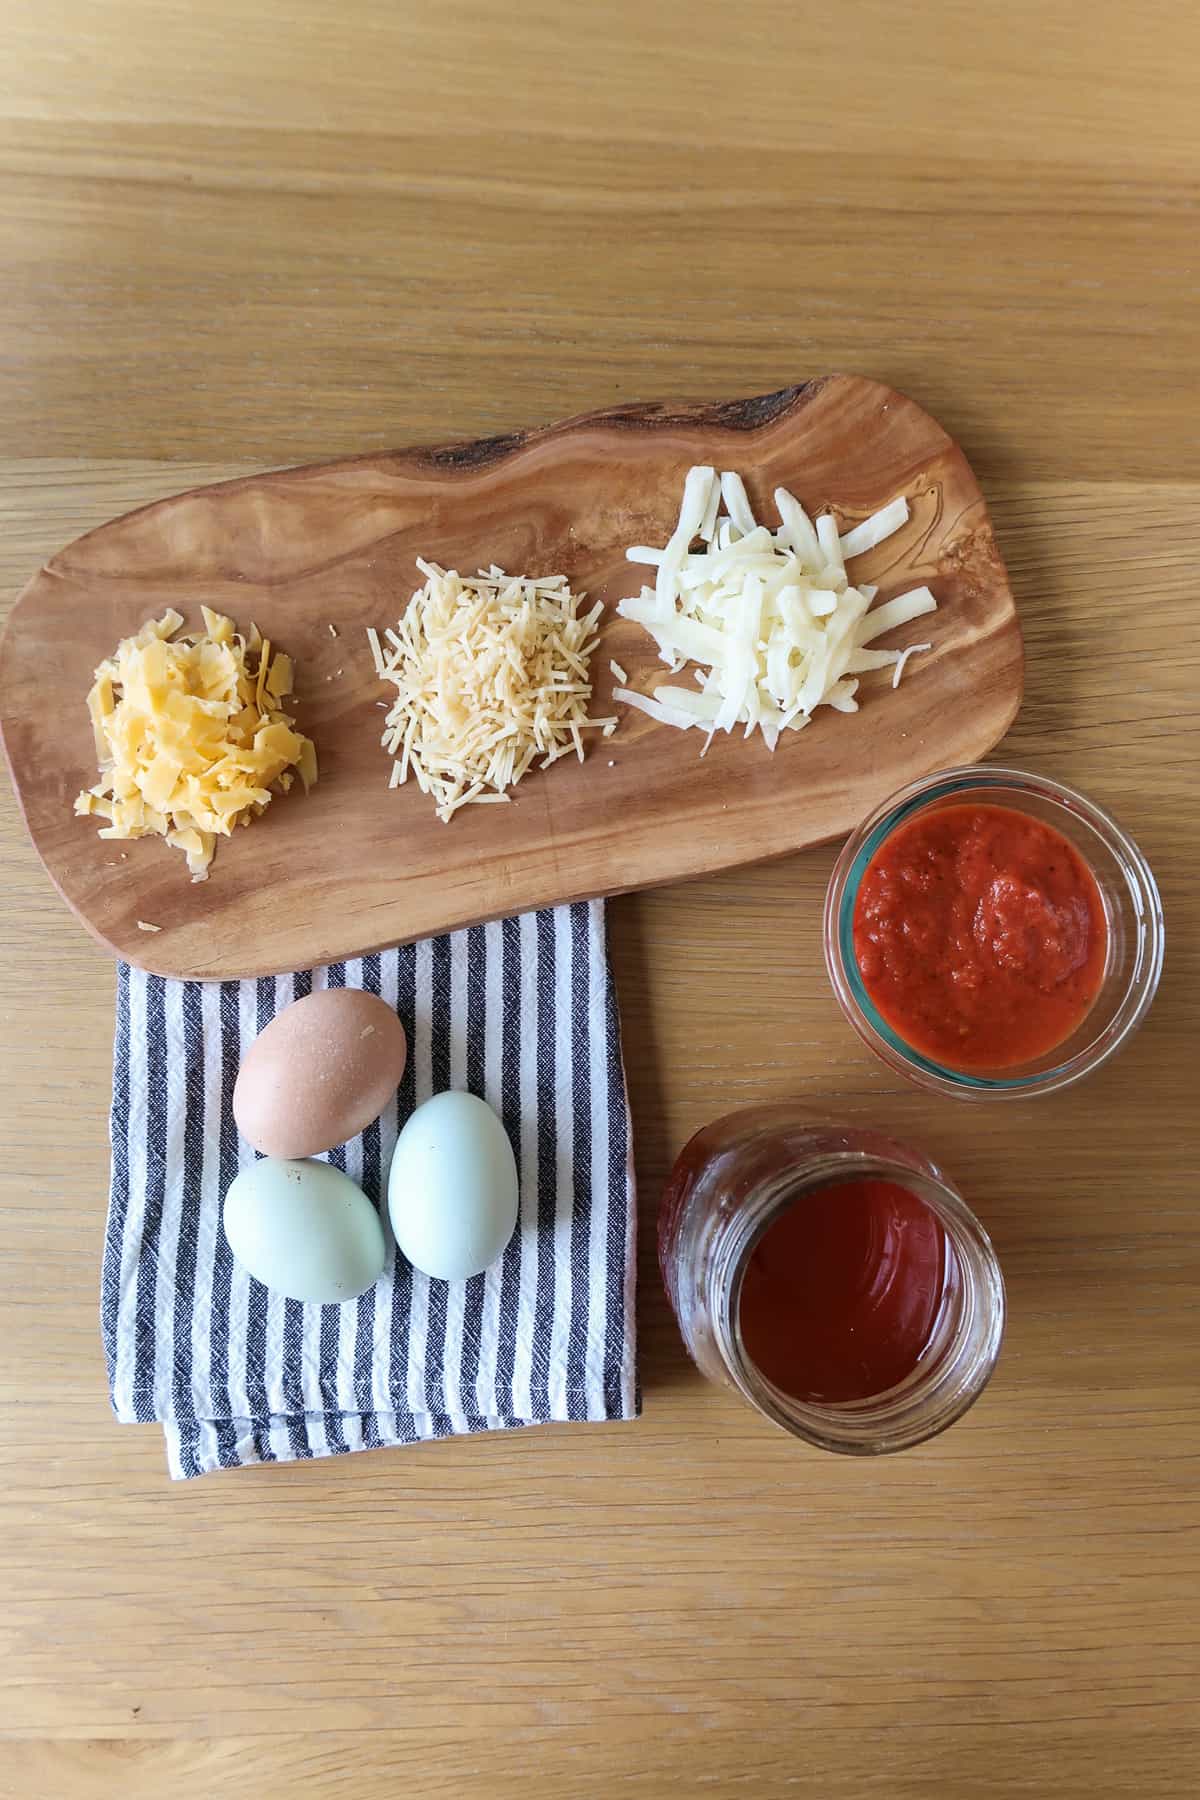 The cheese, eggs, and pizza sauce ingredients on a wood surface.